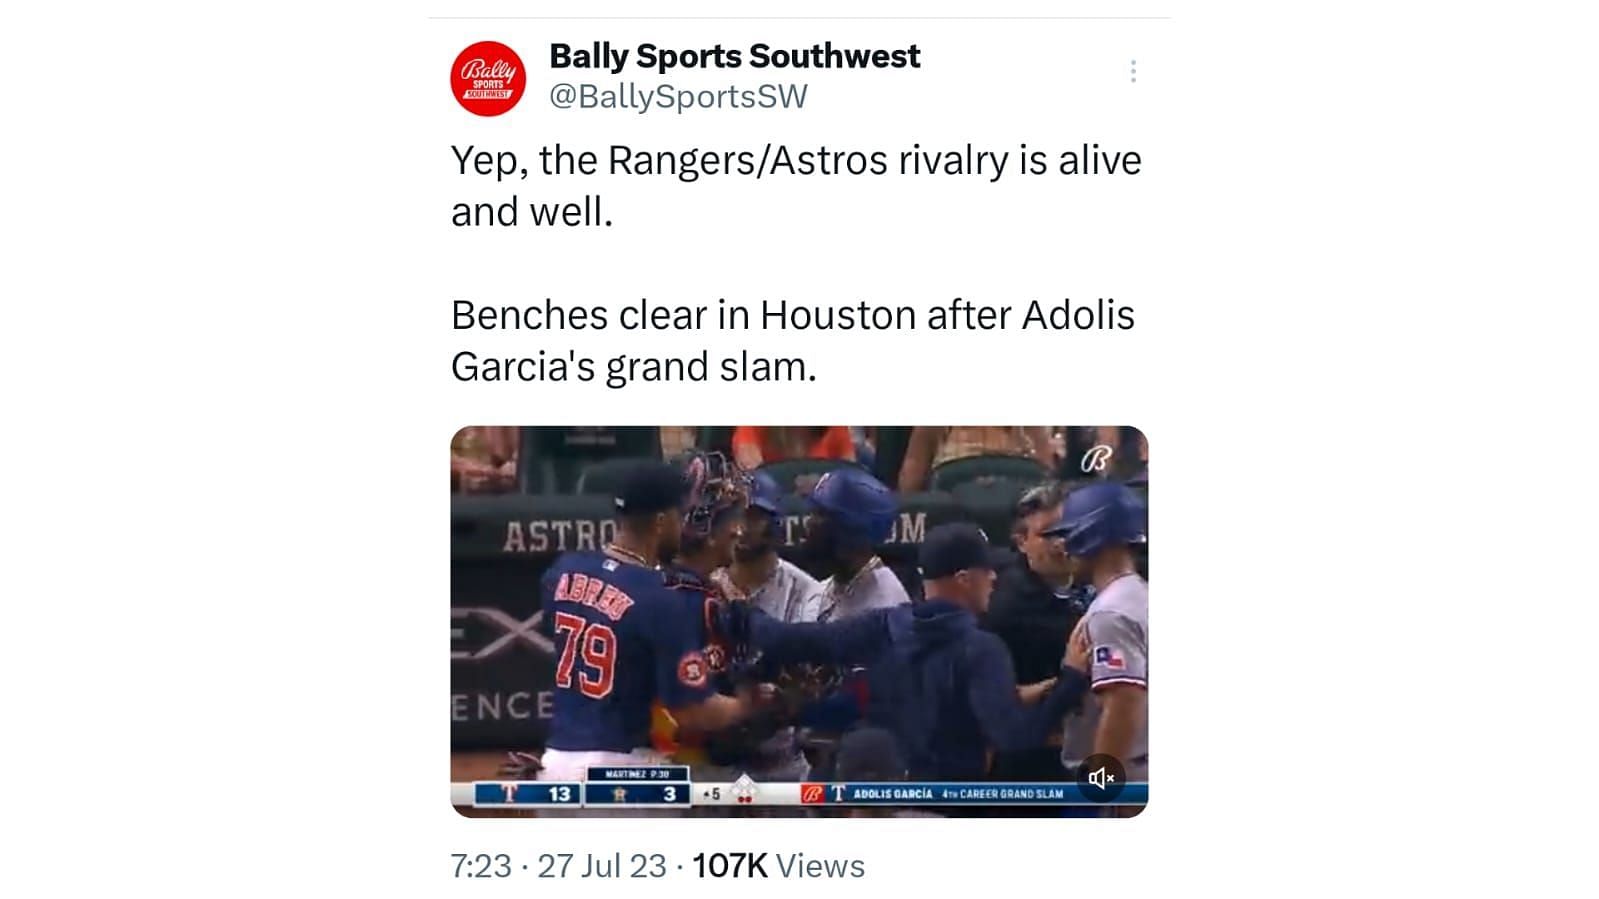 &quot;Yep, the Rangers/Astros rivalry is alive and well.Benches clear in Houston after Adolis Garcia&#039;s grand slam.&quot; - the post read